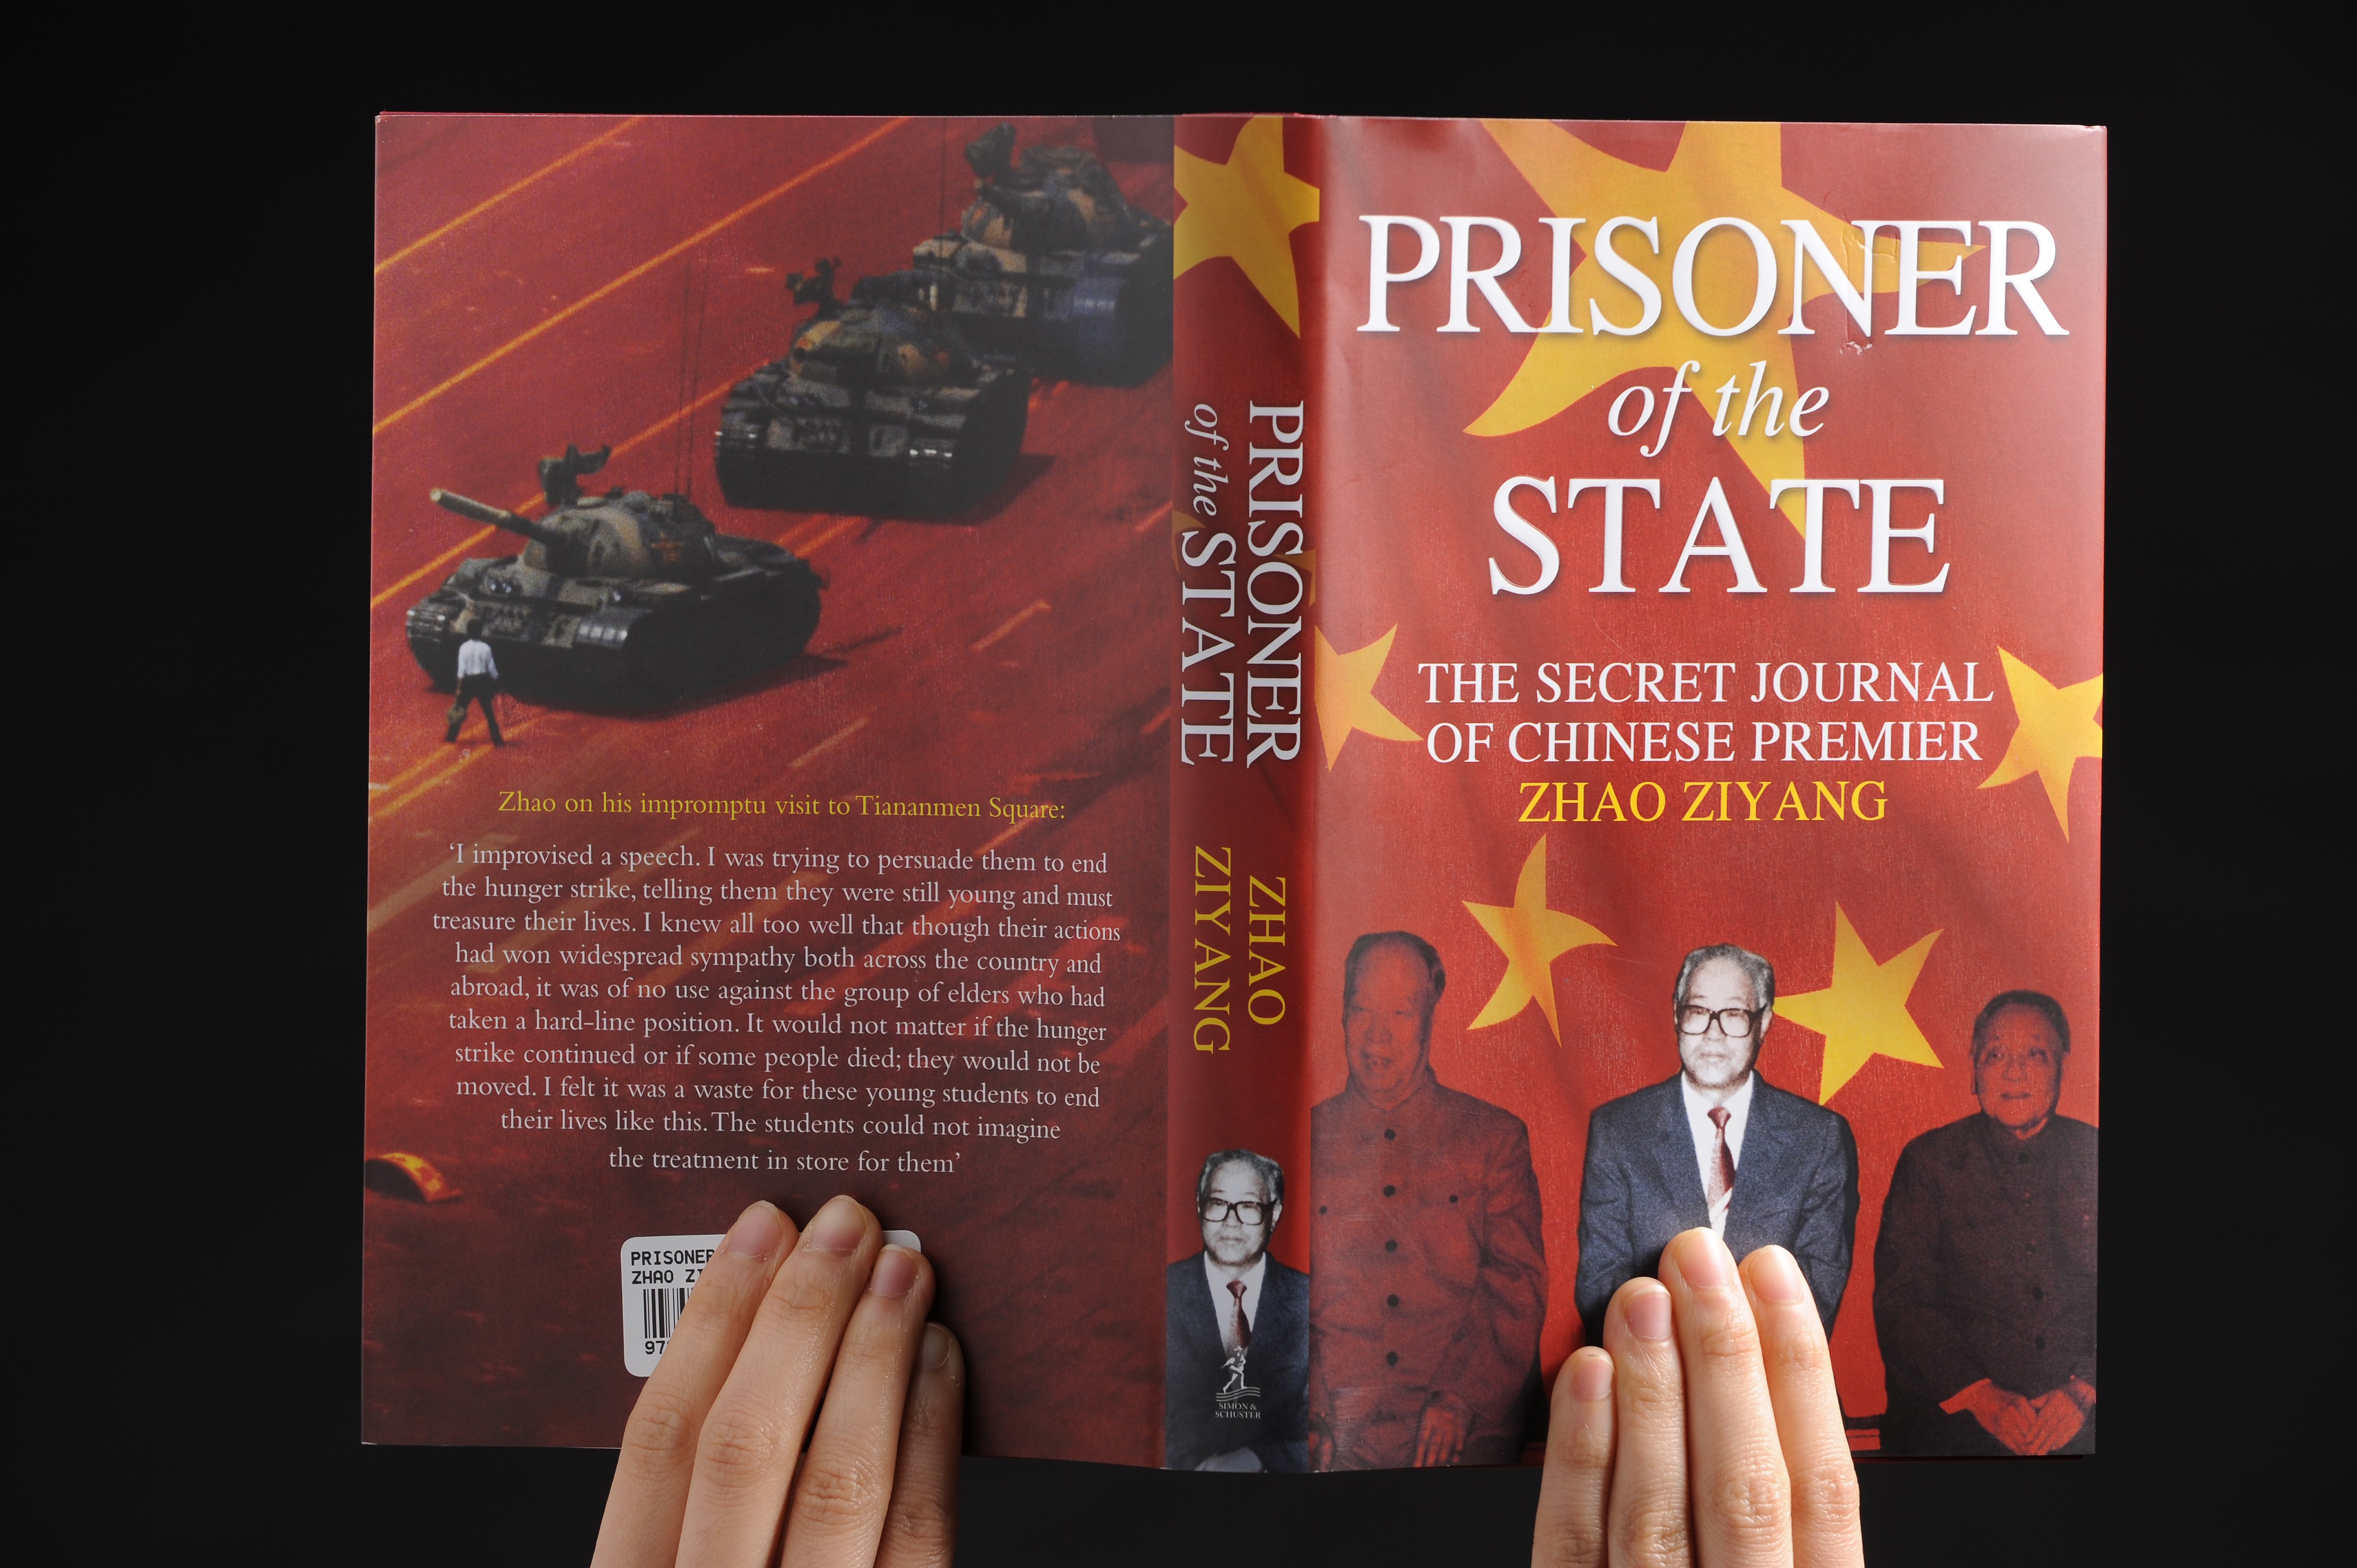 The cover of deposed Chinese leader Zhao Ziyang’s memoirs, released in Hong Kong in May 2009, ahead of the 20th anniversary of the June 4 Tiananmen Square crackdown, which he opposed. Photo: K.Y. Cheng